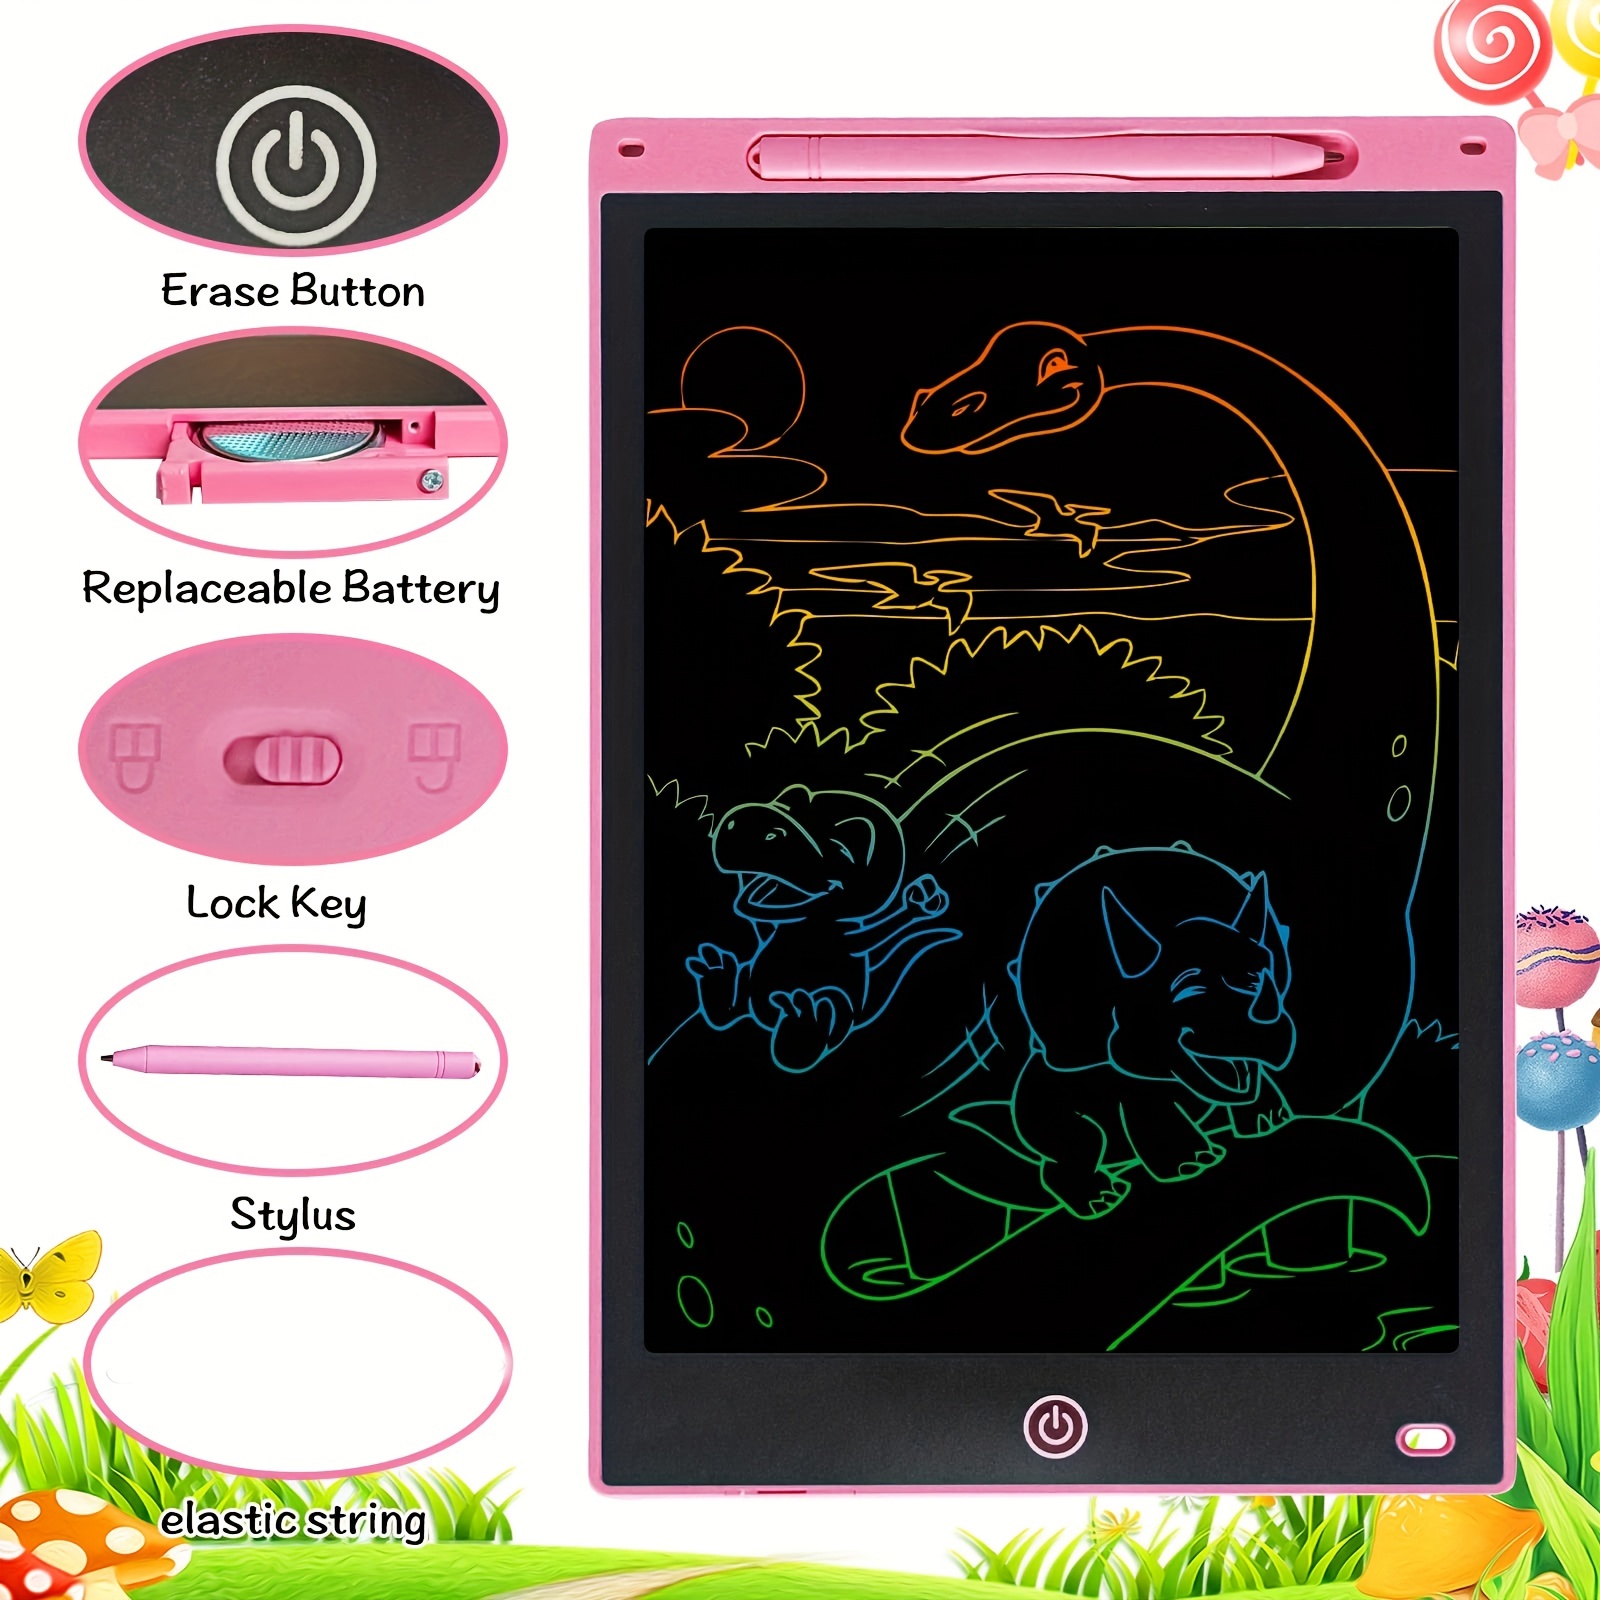 12 inch electronic drawing board writing tablet for kids colorful screen doodle board erasable and reusable digital drawing tablet learning educational toys for girls boys